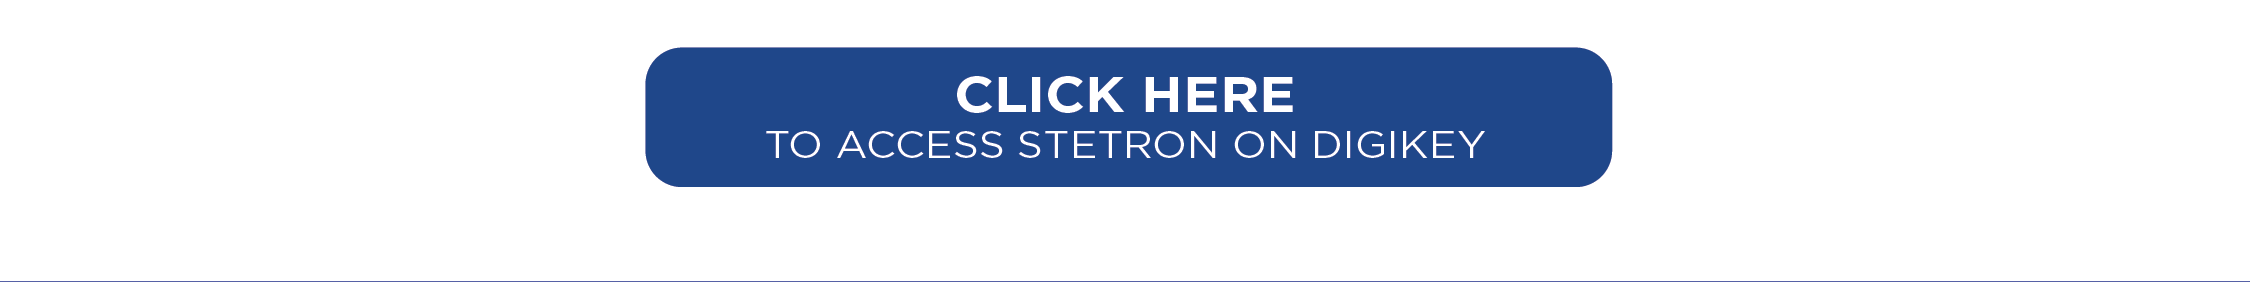 Stetron has been supplying companies across the globe with quality audio products for applications in the Fire and Safety, Medical, Gaming, and Telecom industries.